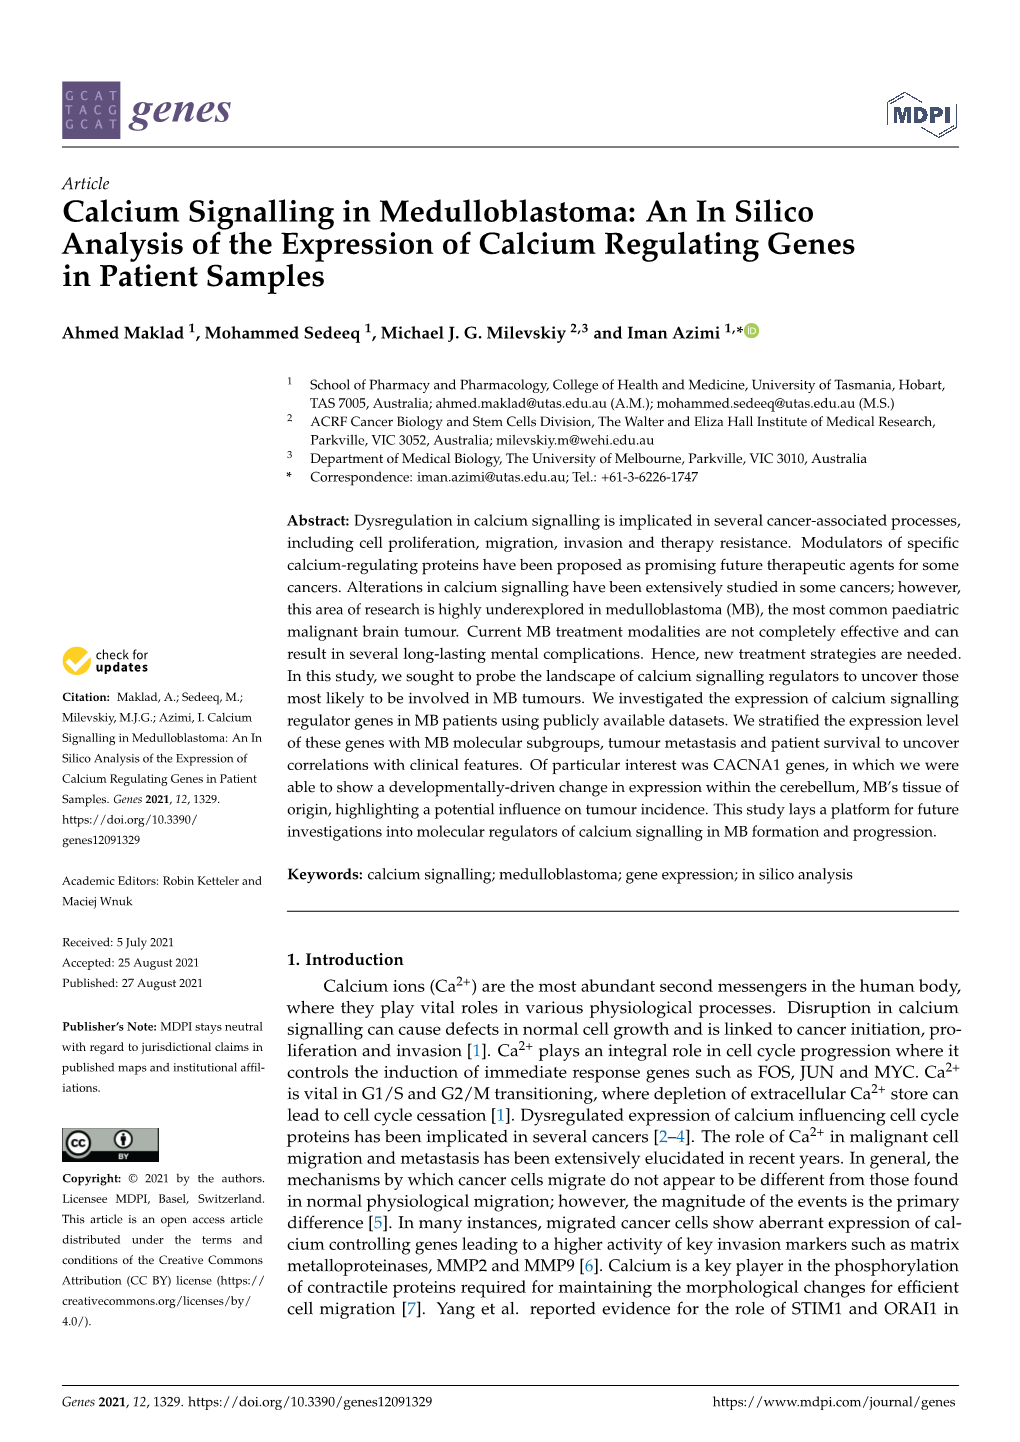 An in Silico Analysis of the Expression of Calcium Regulating Genes in Patient Samples